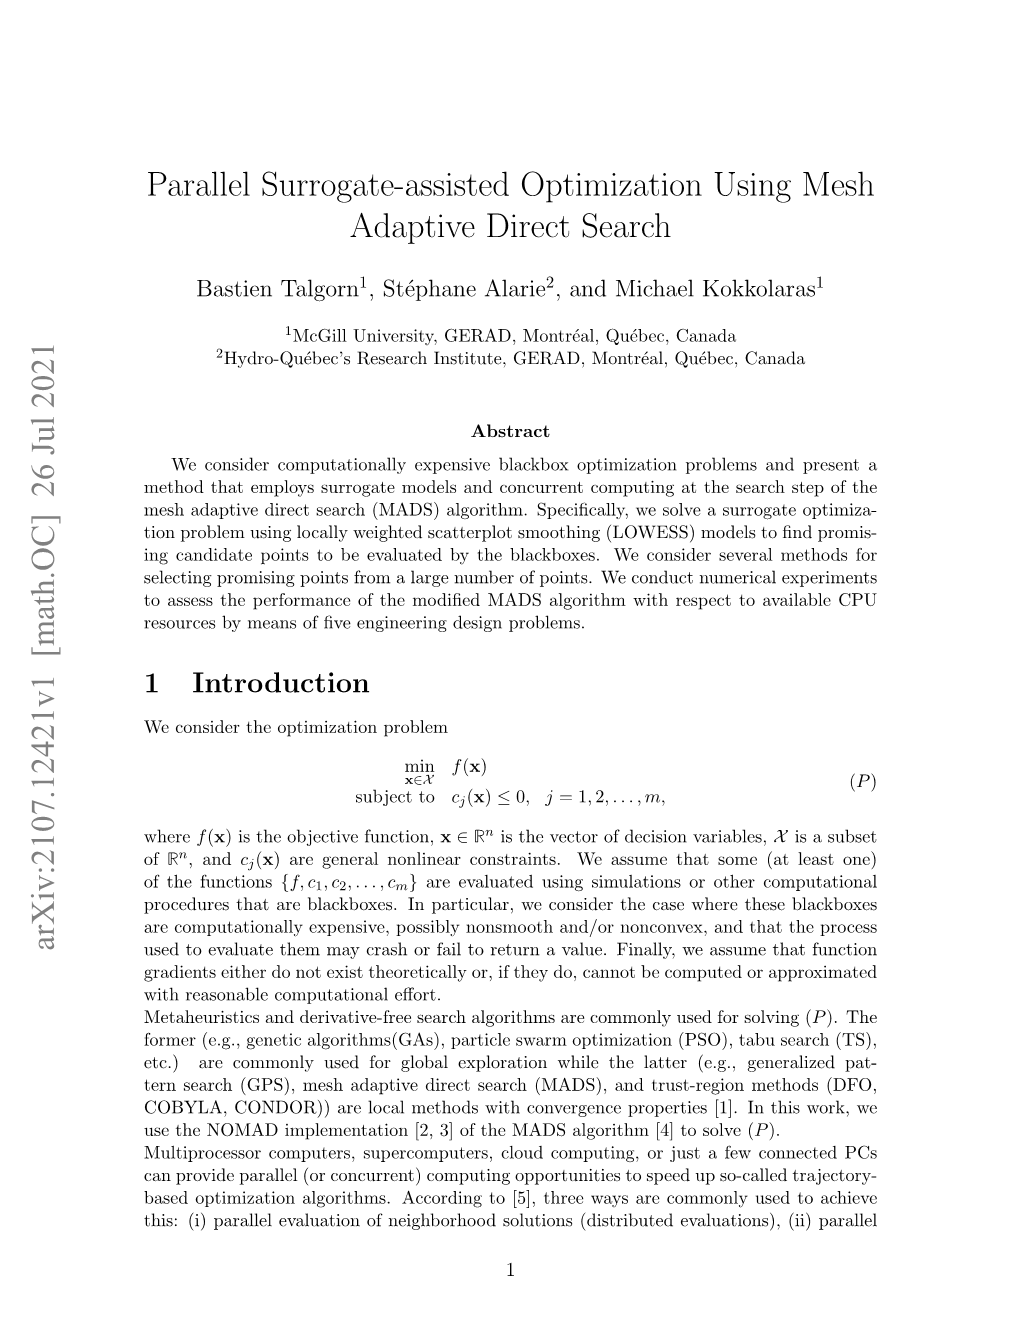 Parallel Surrogate-Assisted Optimization Using Mesh Adaptive Direct Search